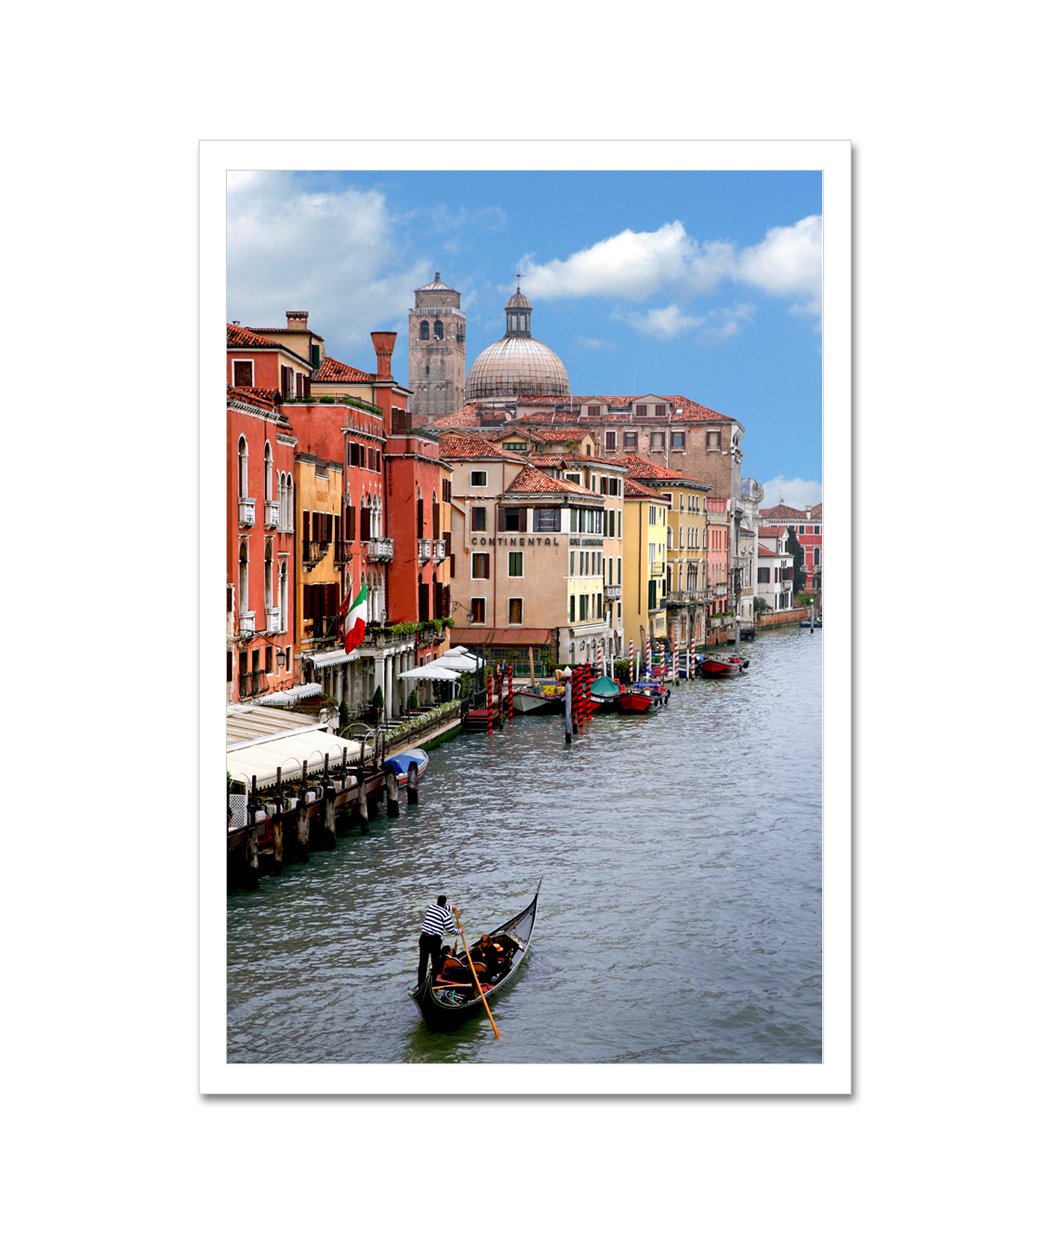 Paint by Number Kits for Adult Beginner Kids, Ride on Gondolas Along The  Gand Canal in Venice Italy DIY Digital Oil Painting Kit Framed Canvas Kit